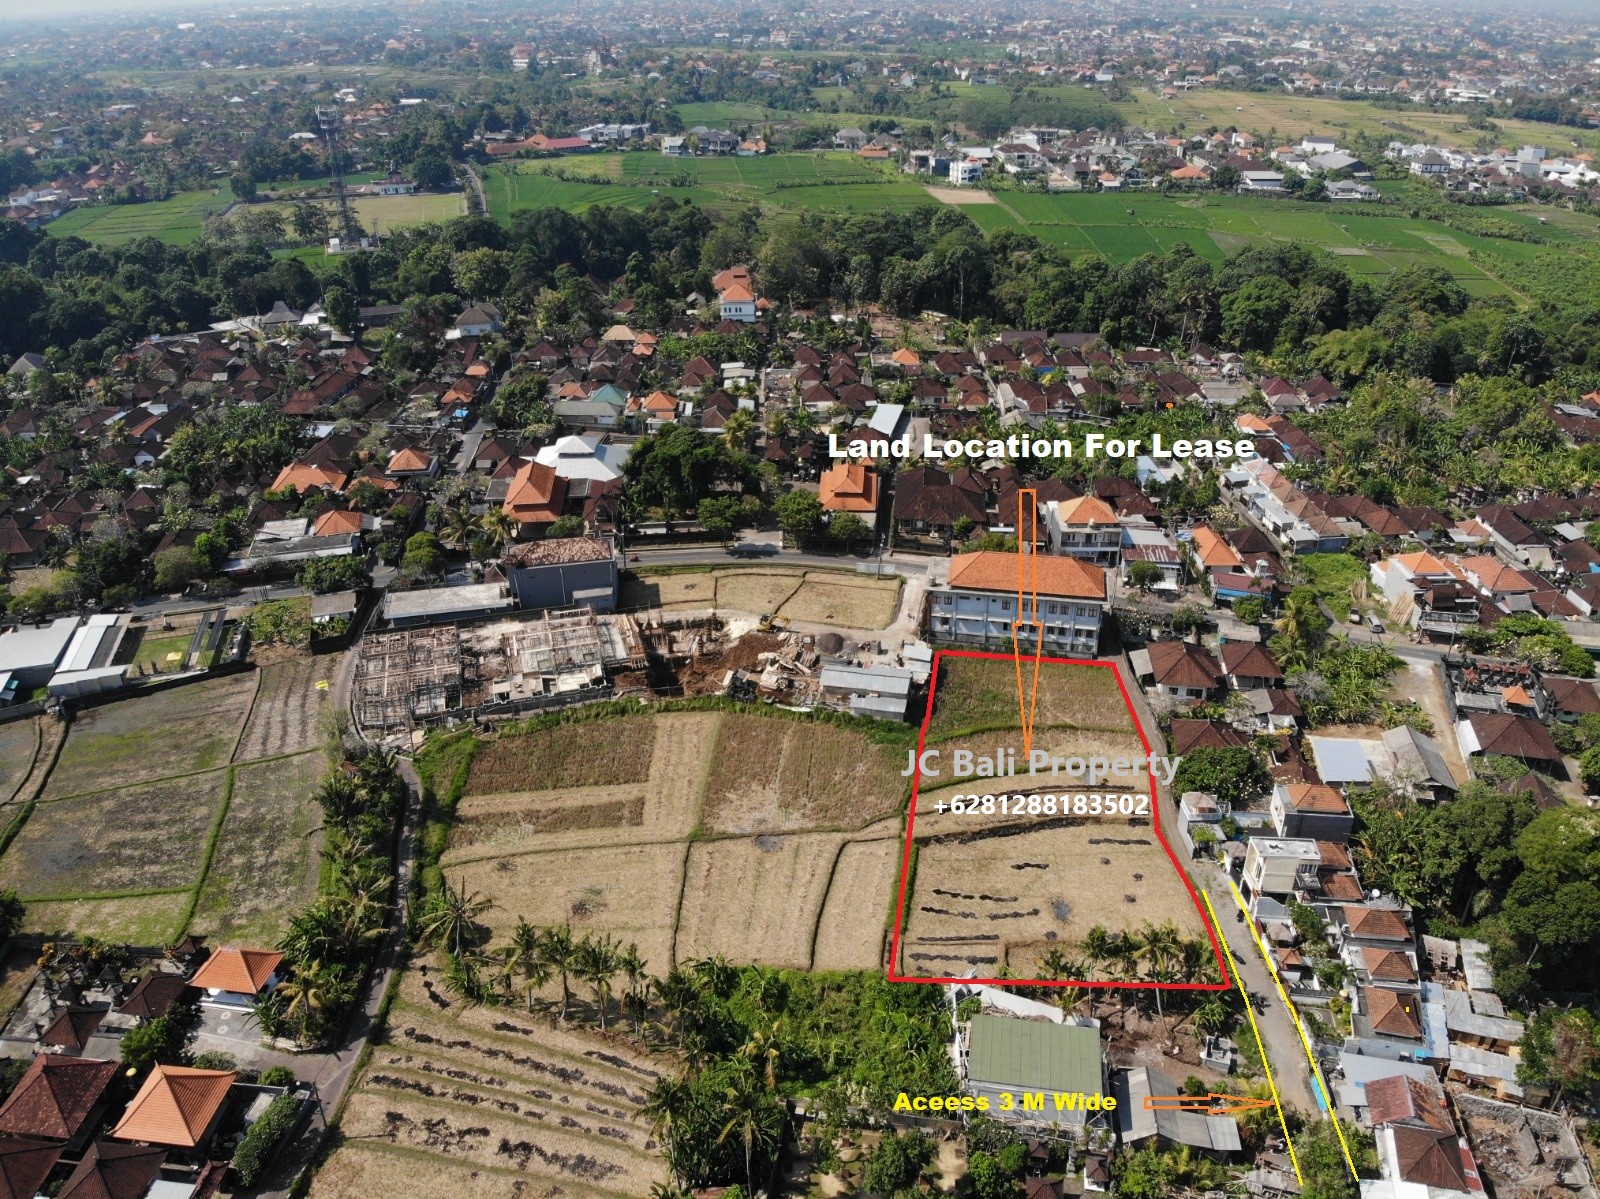 LEASEHOLD LAND IN TUMBAK BAYUH, SIZE 20 ARE/2000M2